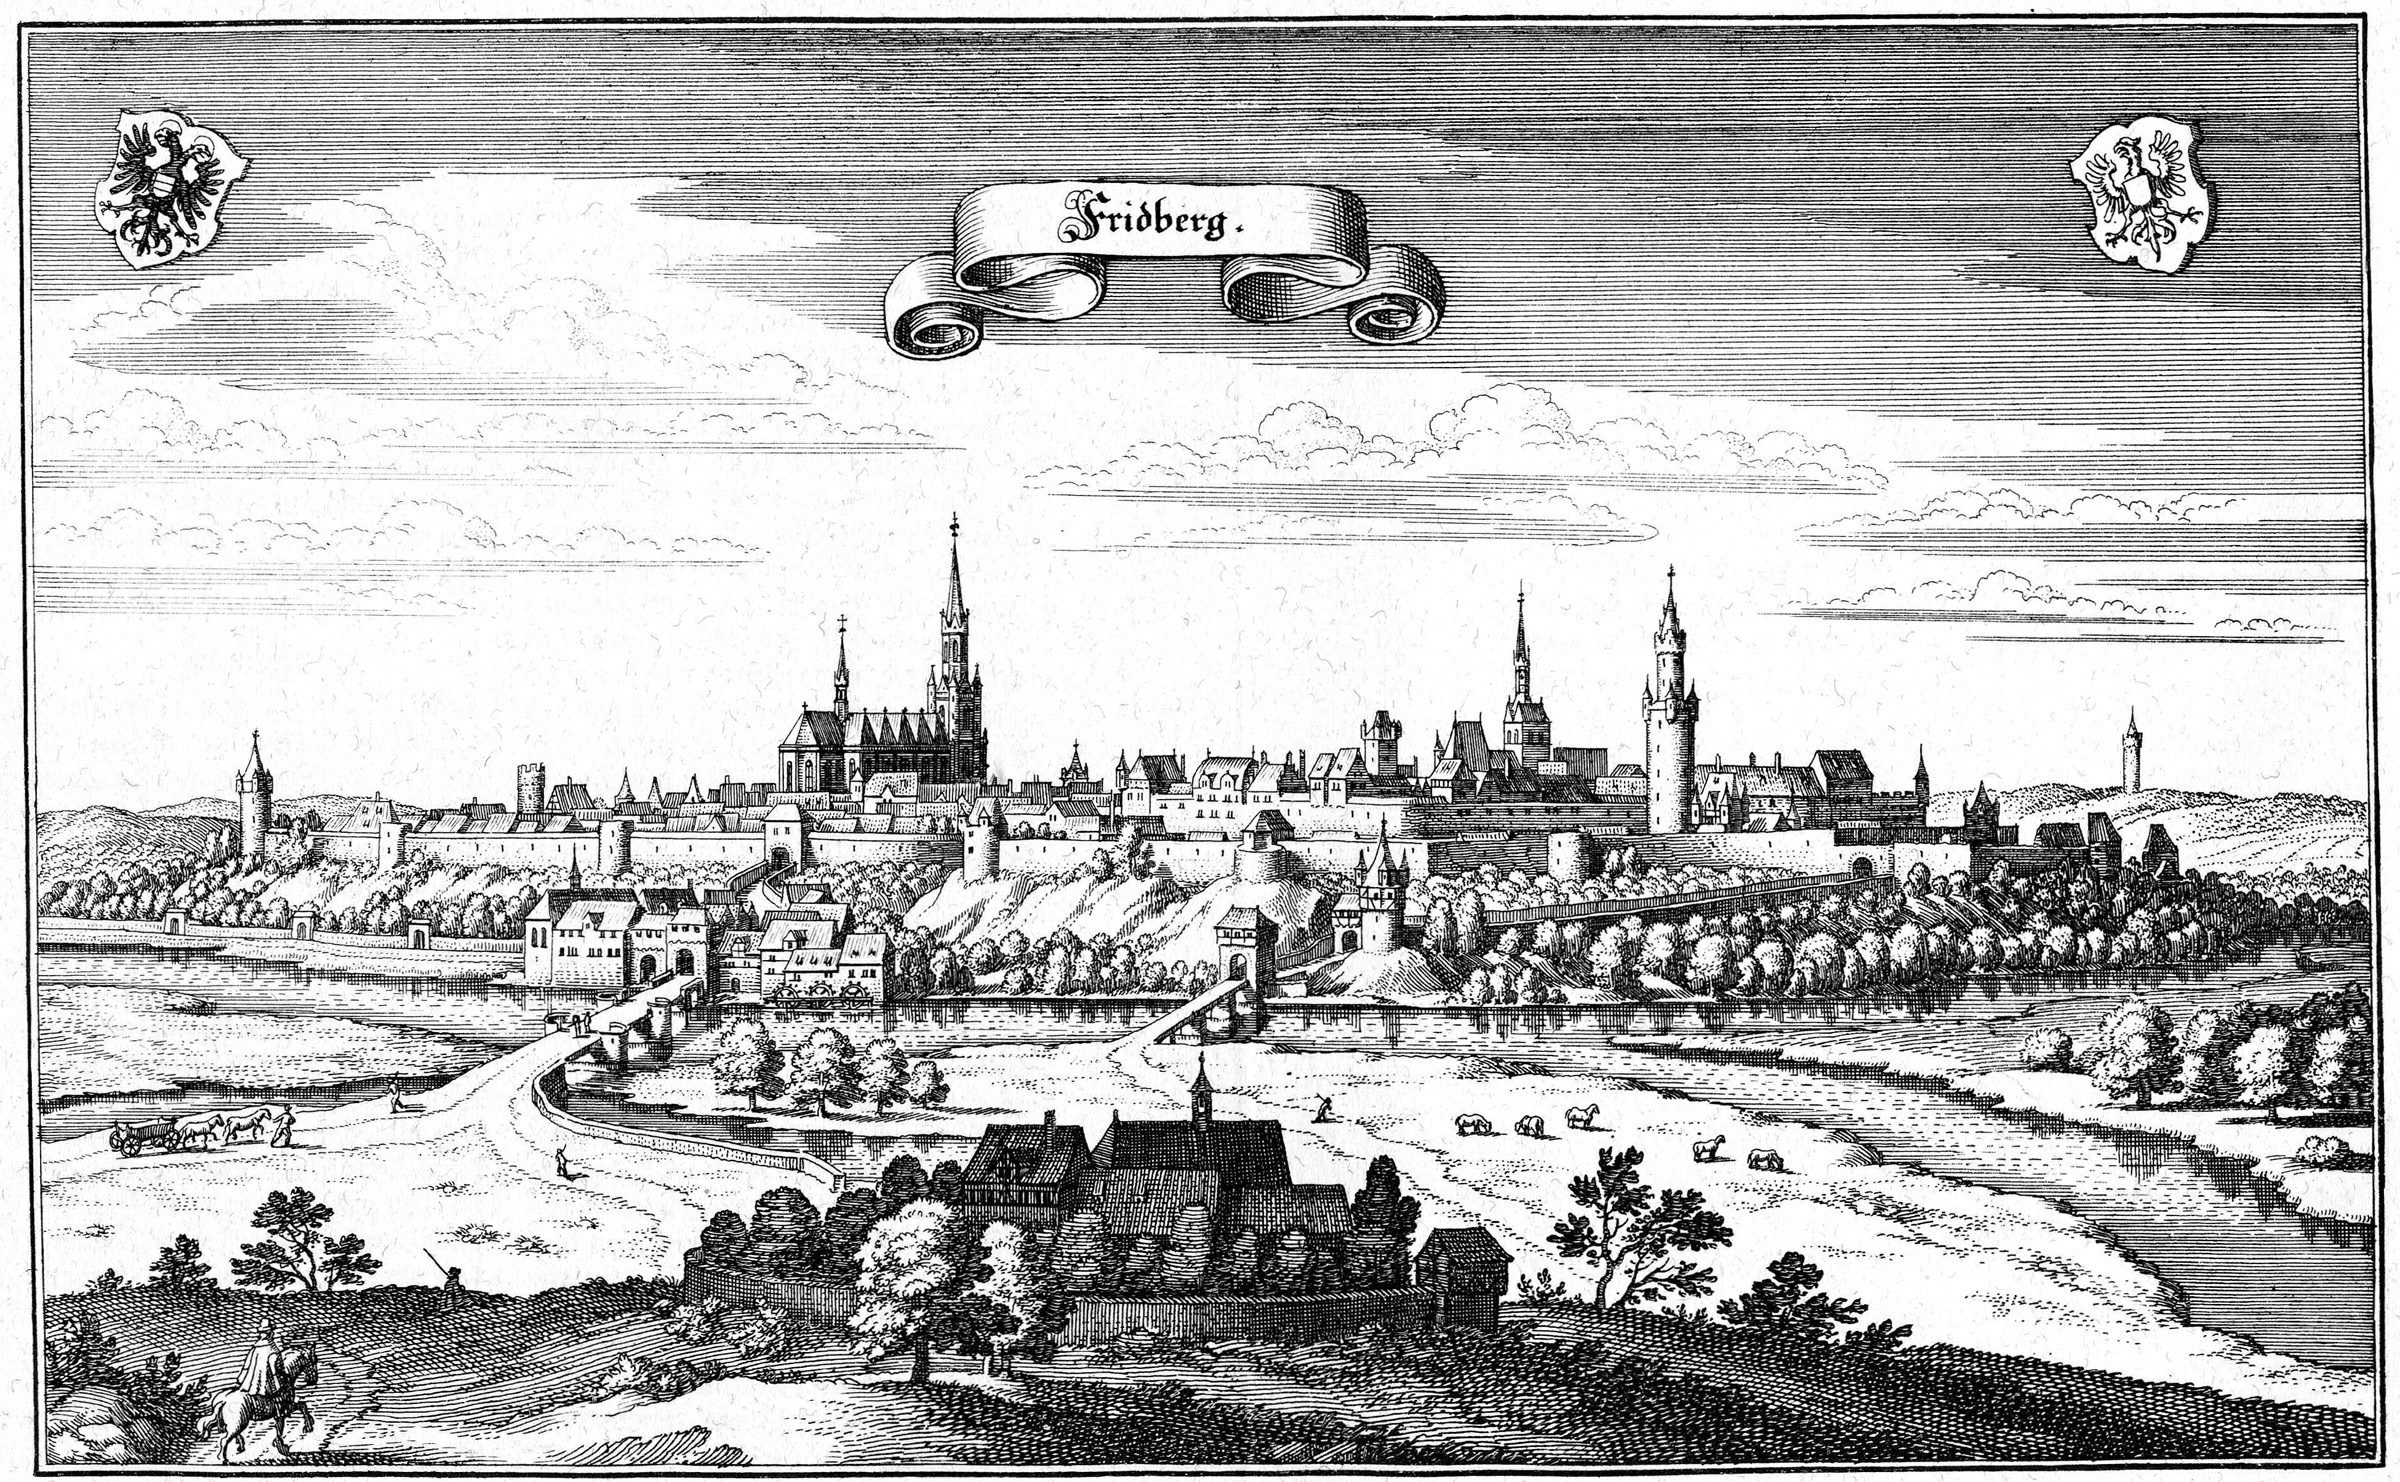 Friedberg – Auszug aus der Topographia Hassiae von Matthäus Merian 1655. Source: Wikipedia. The Burg Kirche is shown as the tall spire right of center in this drawing. The church on the left is the Stadt Kirche and the tower on the right is the Adolf Tower at Friedburg Castle.